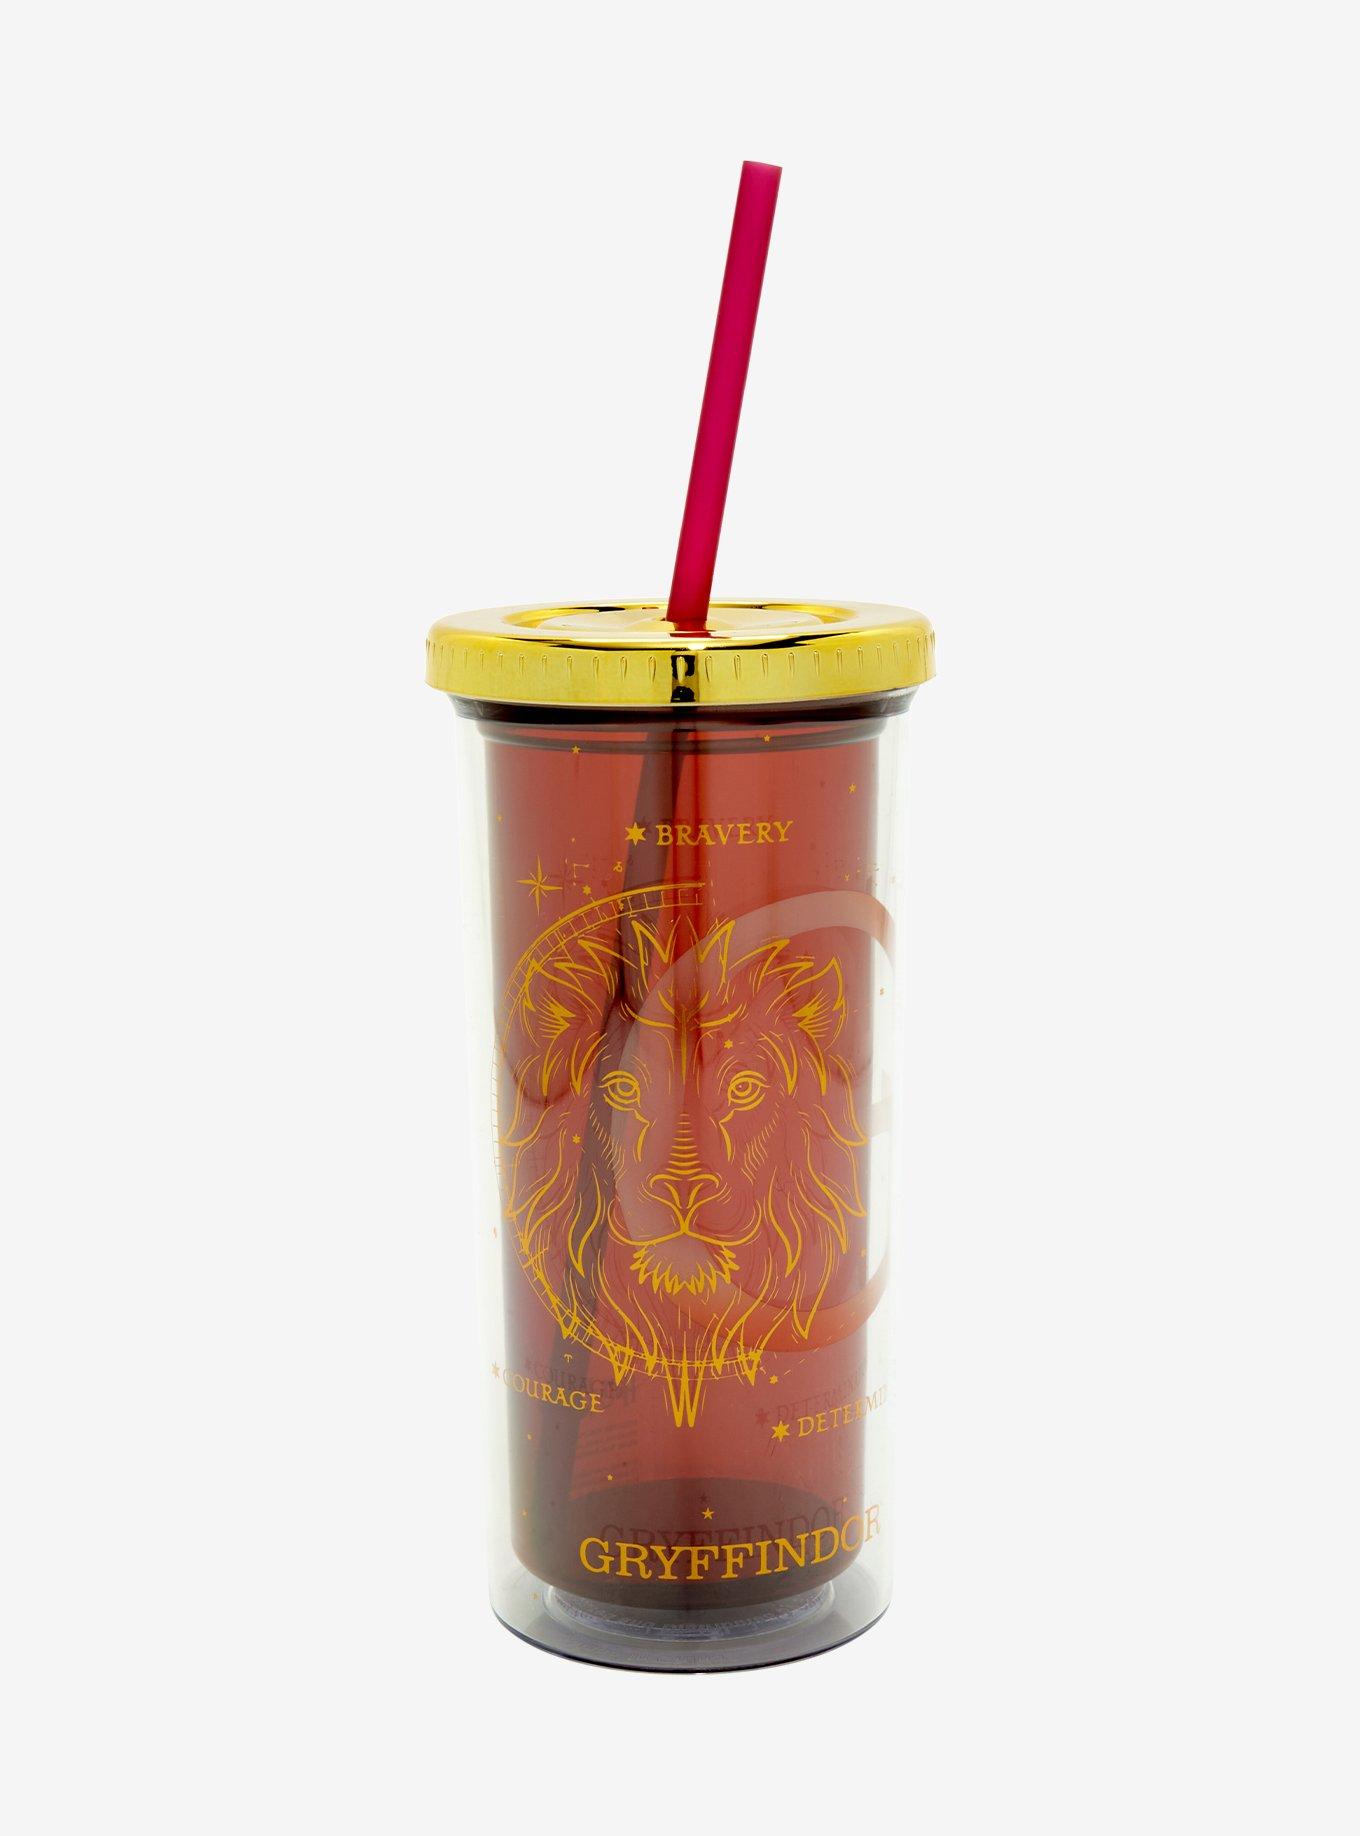 Toynk Harry Potter Hogwarts Crest Carnival Cup With Lid And Straw | Holds  20 Ounces